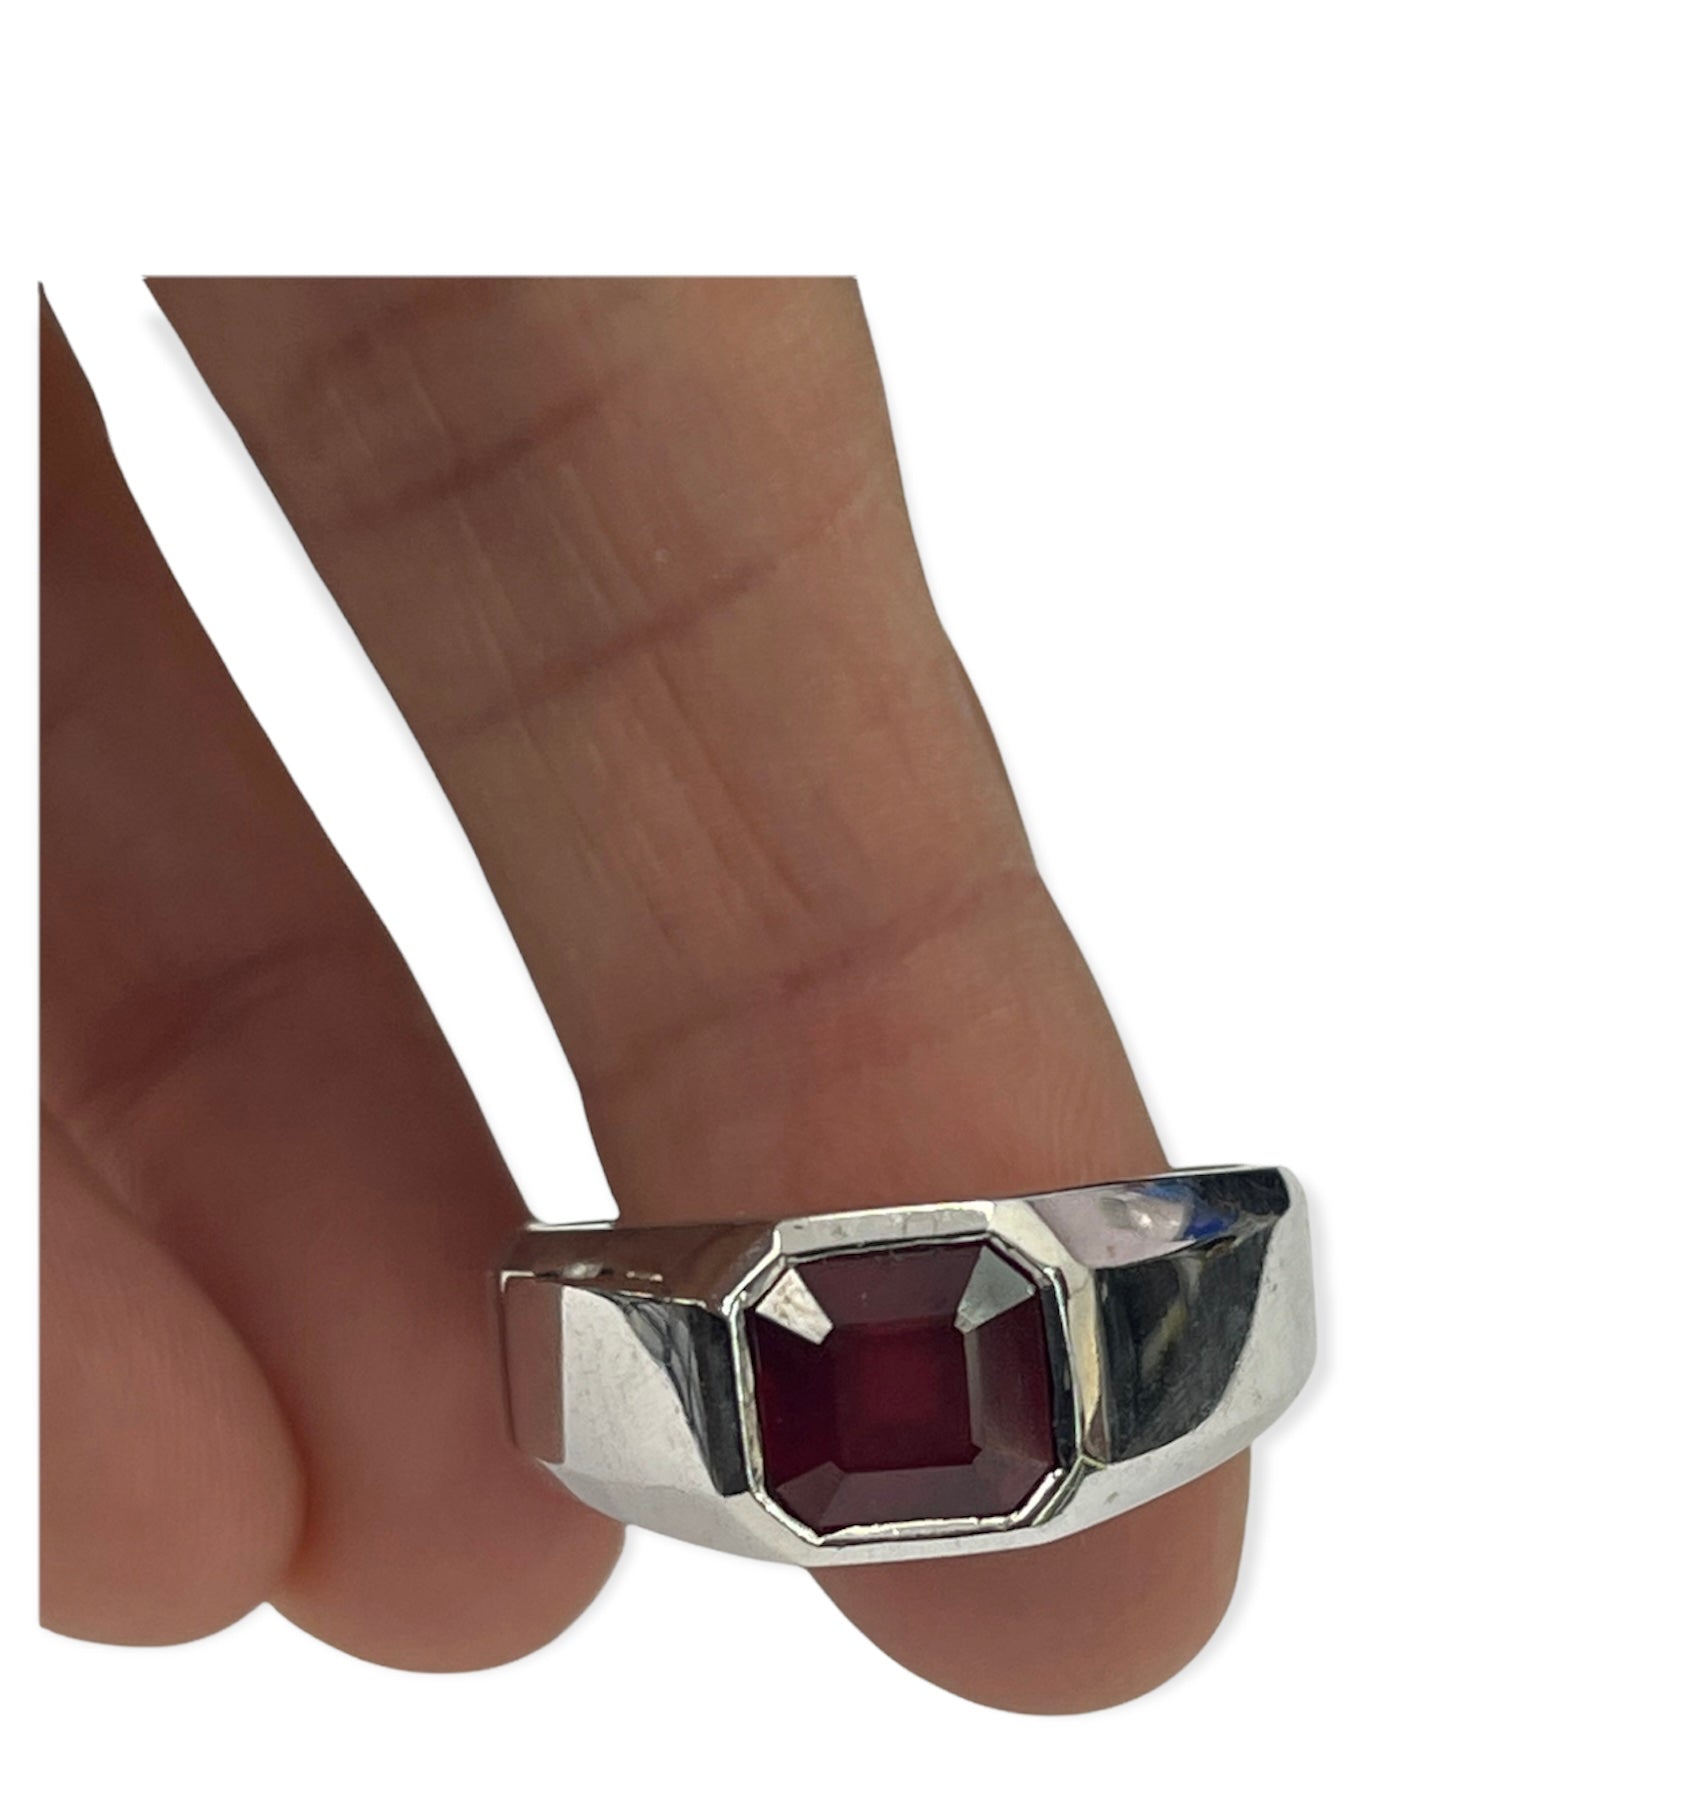 2.69 Carats Ruby Gem Solitaire Ring White Gold 14kt